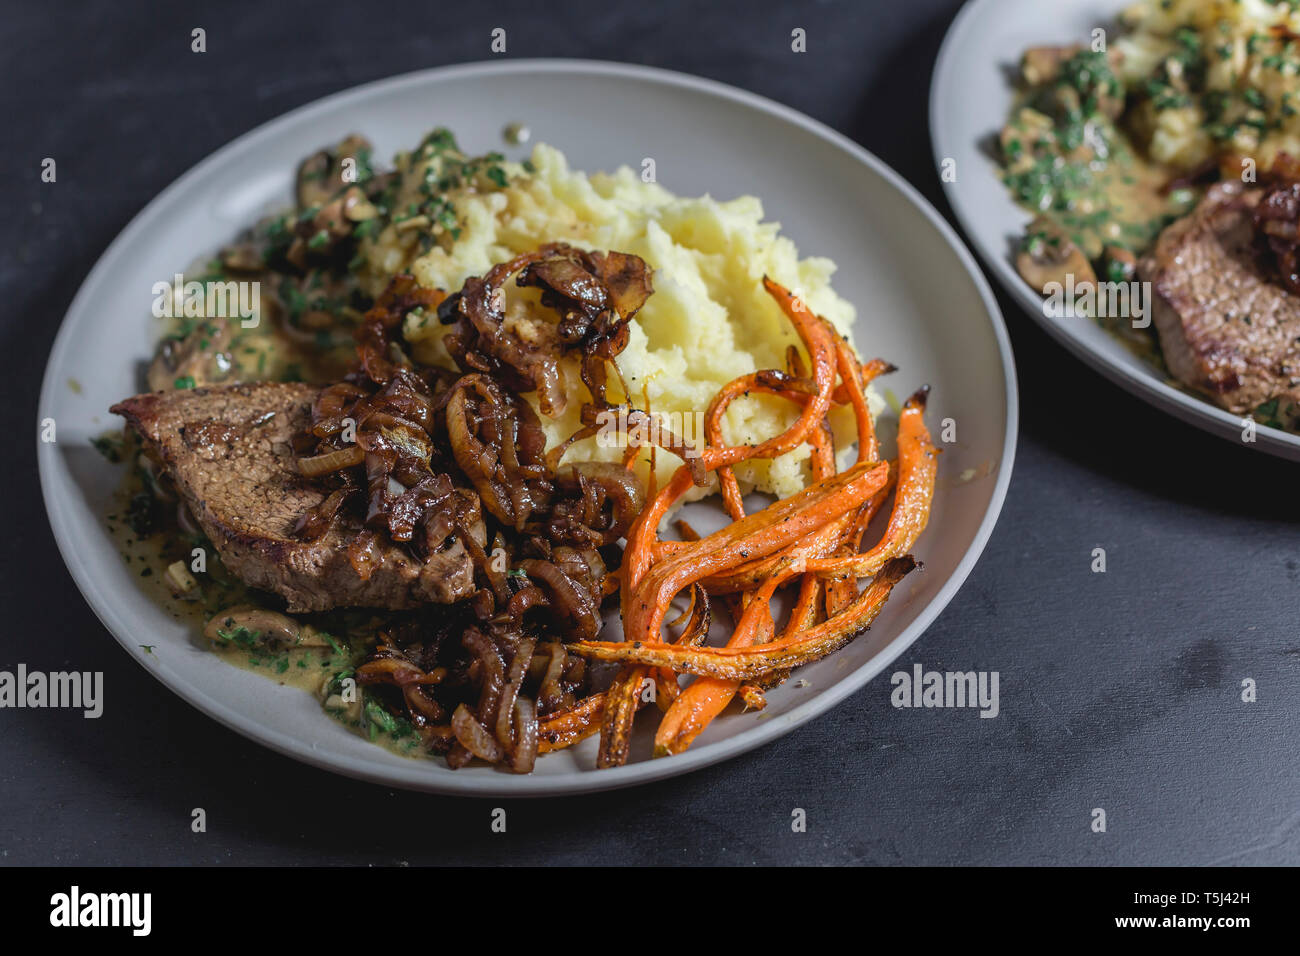 Beef sirloin steak with mushroom-mustard sauce, mashed potatoes, braised onions and carrot strips Stock Photo